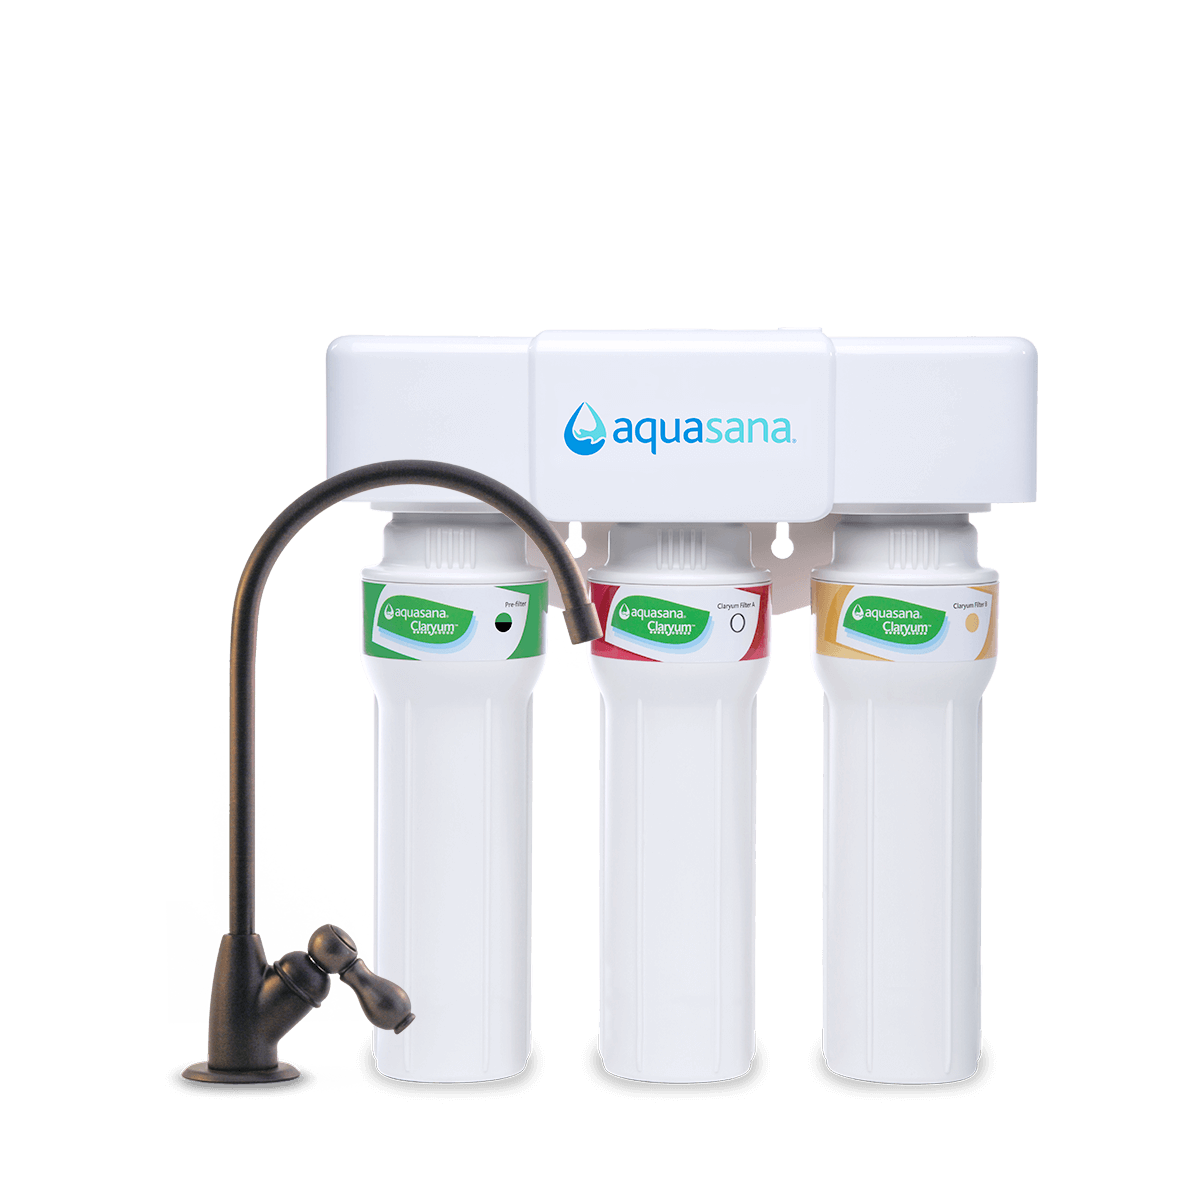 Aquasana 3-Stage Under Sink Water Filter Max Flow, Oil Rubbed Bronze, 1/2 Year/800 Gallon photo